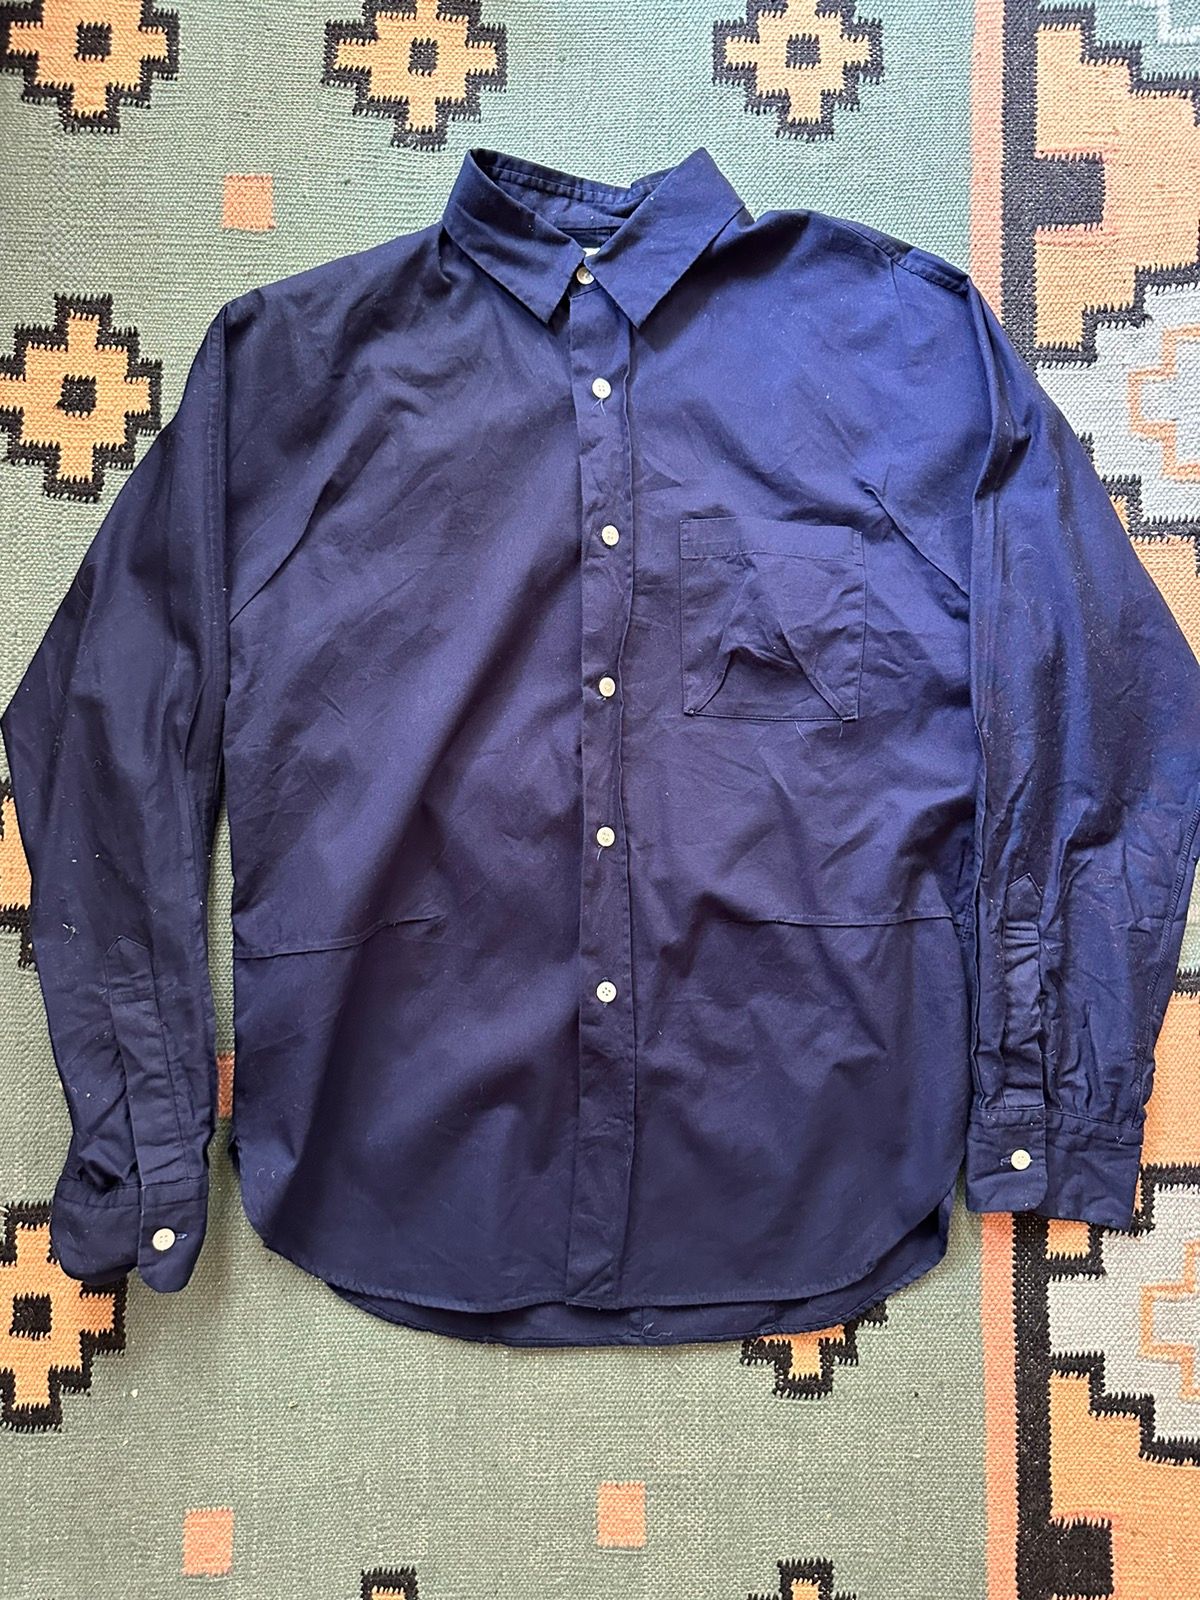 Nepenthes New York Nepenthes shirt Size US S / EU 44-46 / 1 - 1 Preview